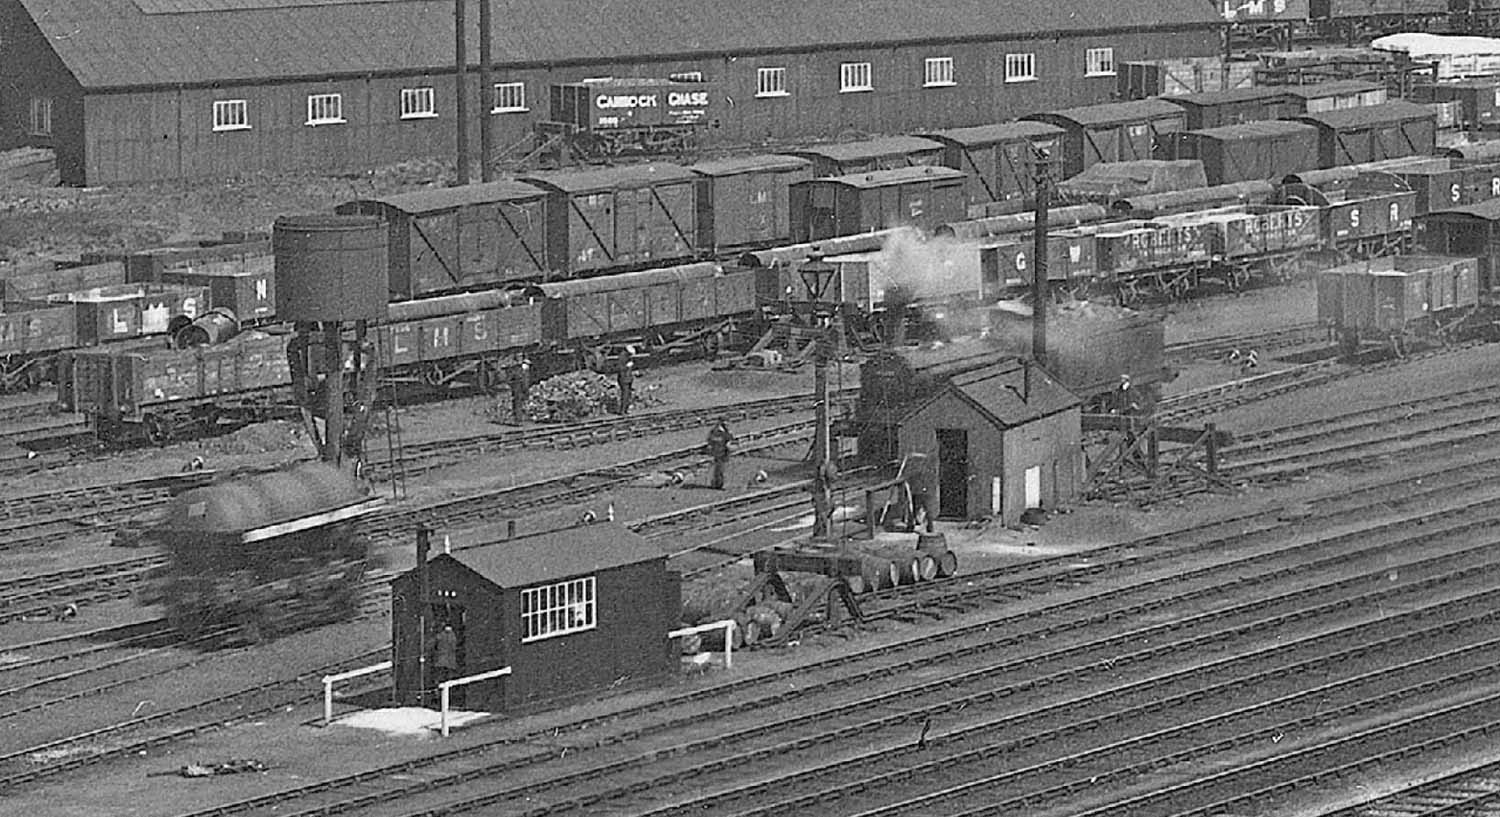 Close up showing an oil wagon being fly shunted passing the 'parachute' water column with the locomotive paused by the offices and mess huts of the yard staff